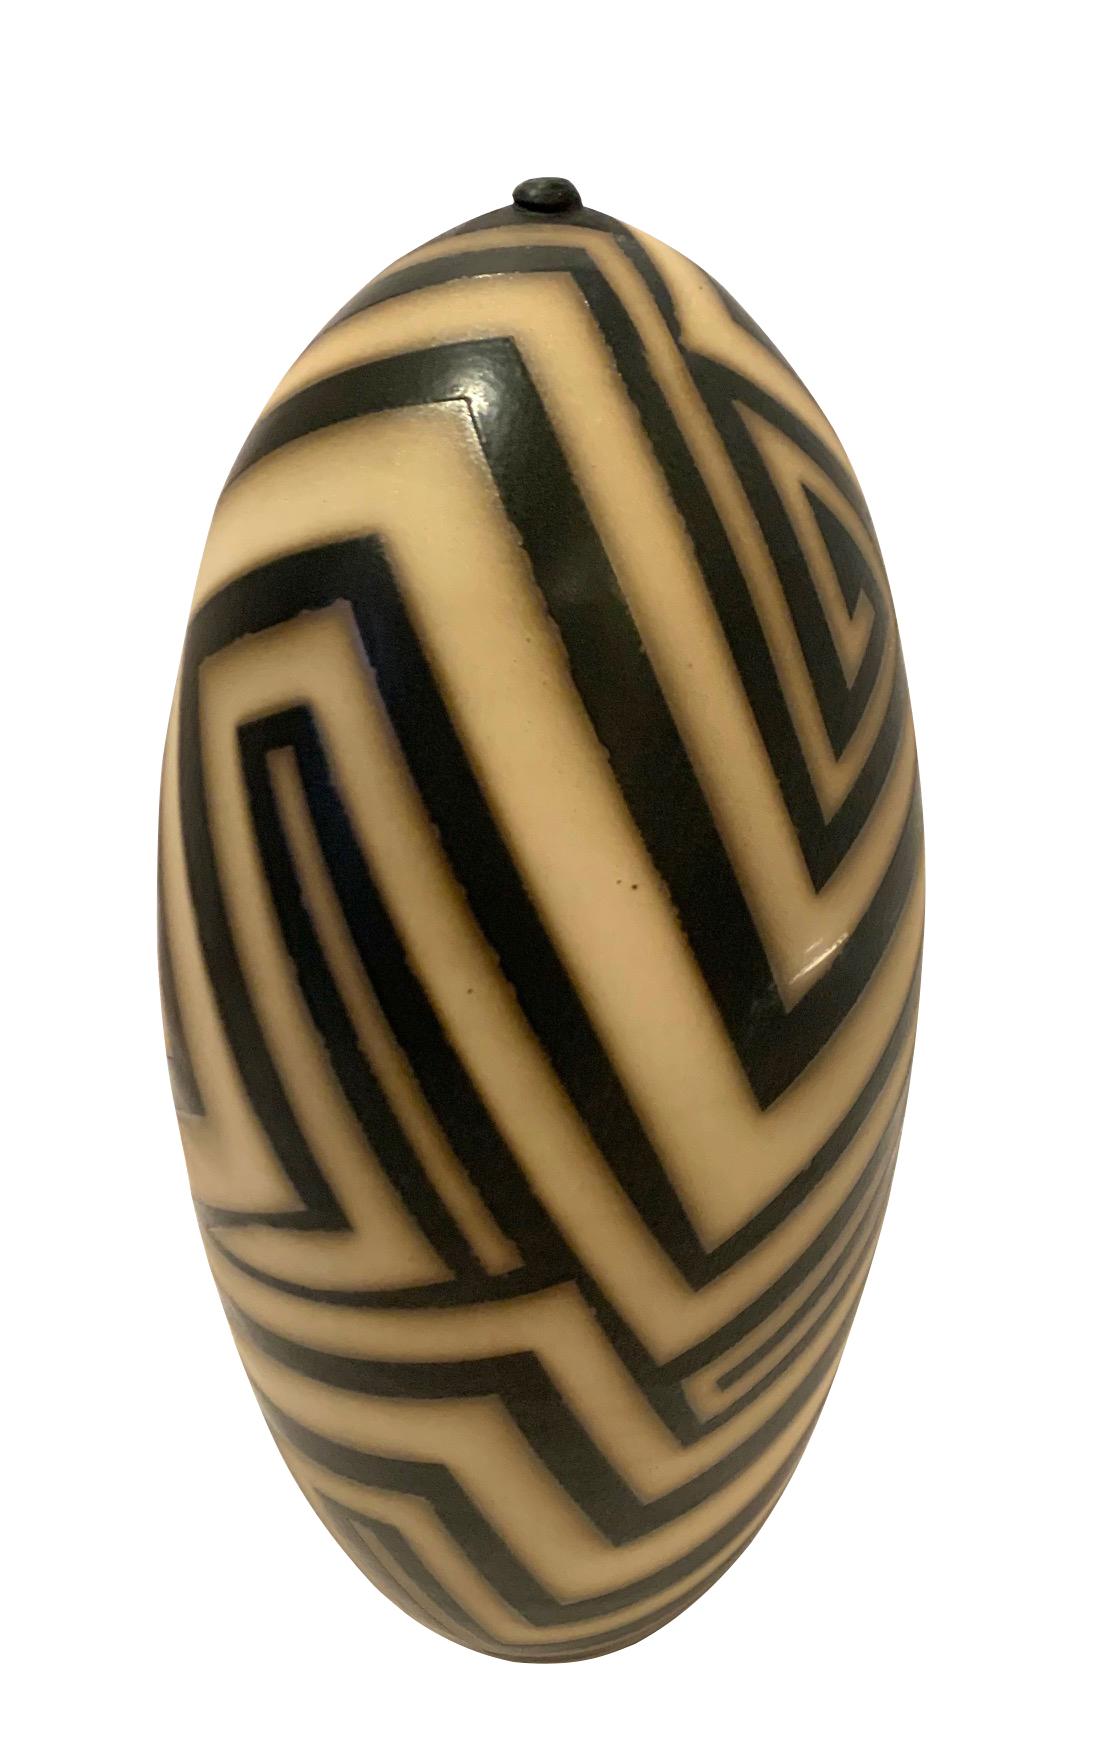 Contemporary made in the USA stoneware black and cream geometric stripe pattern design.
Hand made one of a kind.